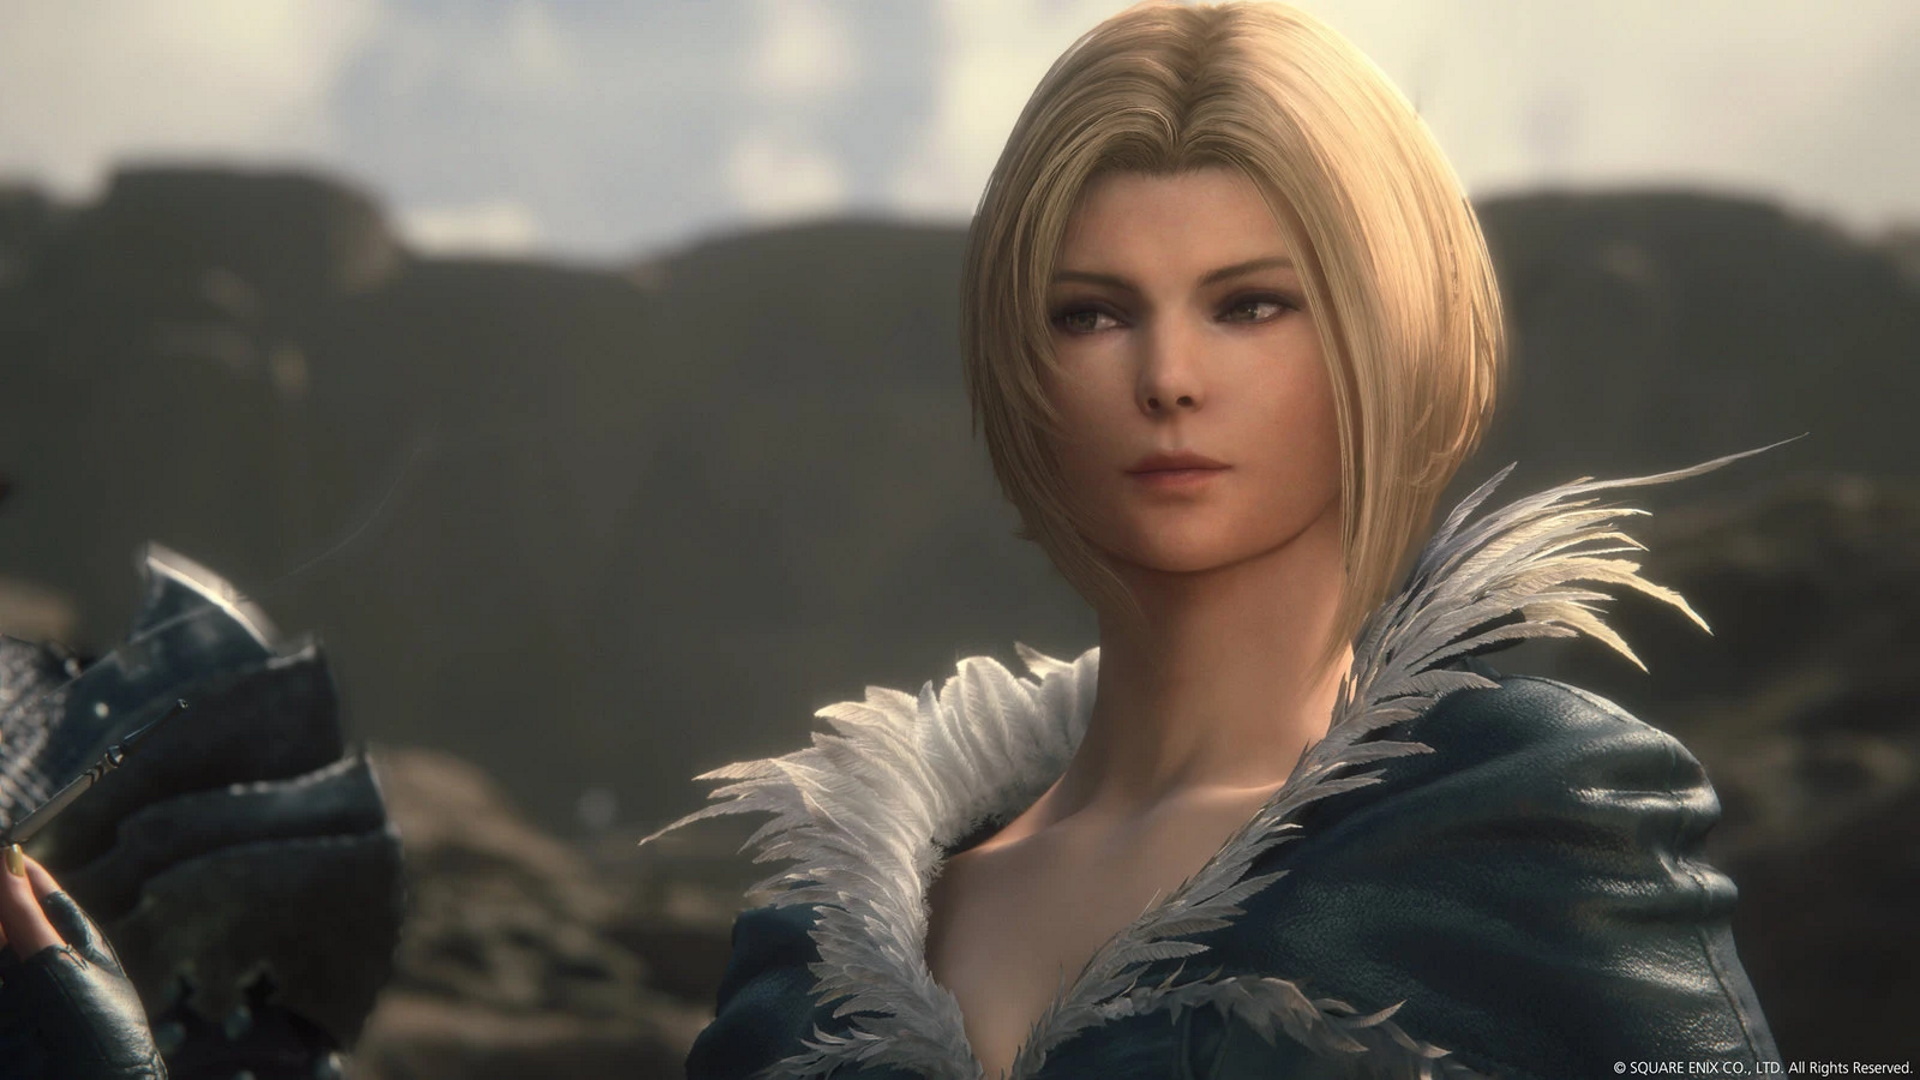 Final Fantasy 16's plot is about the fight to control magical oil